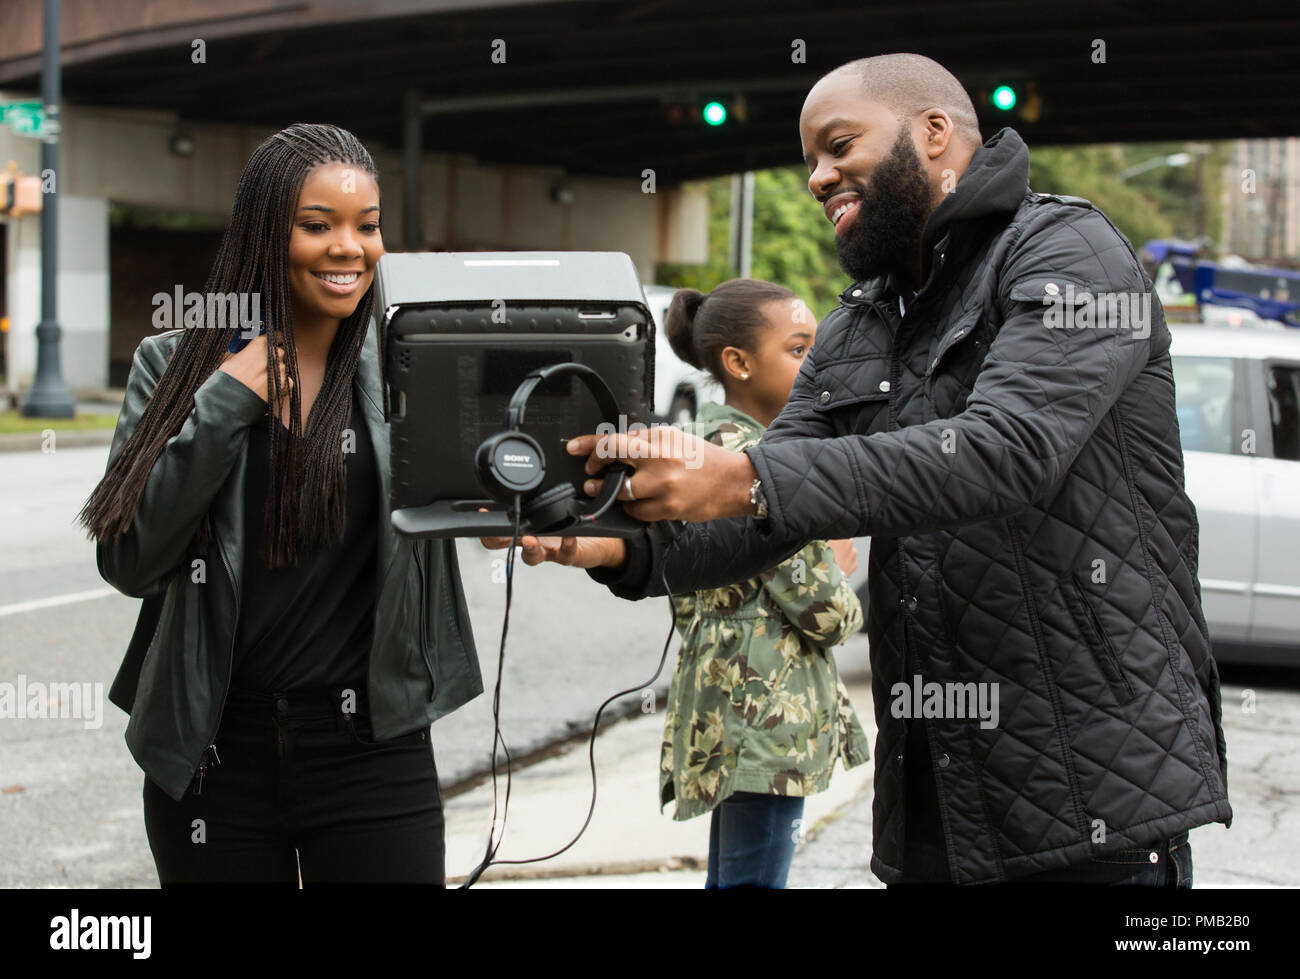 Executive producer GABRIELLE UNION as Rachel and writer/director DAVID E. TALBERT on the set of the comedy 'Almost Christmas,' the festive story of a beloved patriarch who asks his family for one gift this holiday season: to get along.  If they can honor that wish and spend five days under the same roof without killing one another, it will be a Christmas miracle. Stock Photo